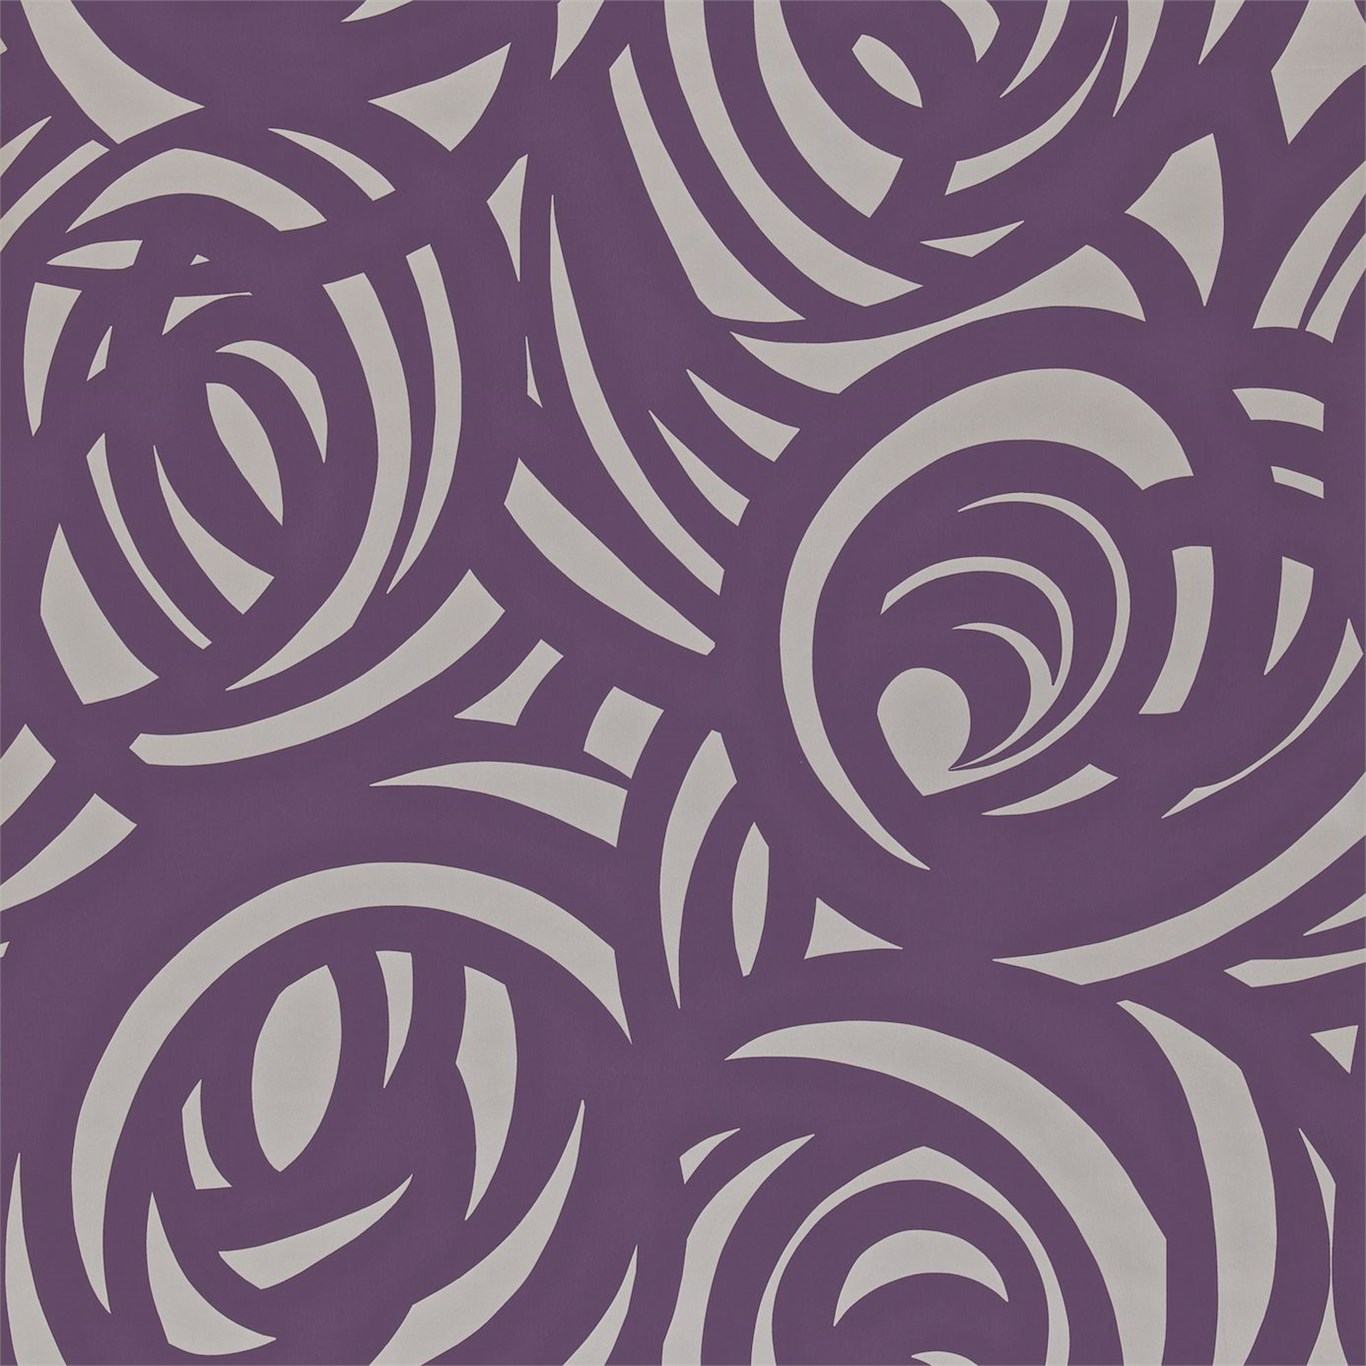 Vortex, A Wallpaper By Harlequin, Part Of The Momentum - Purple On Silver Wall Paper - HD Wallpaper 